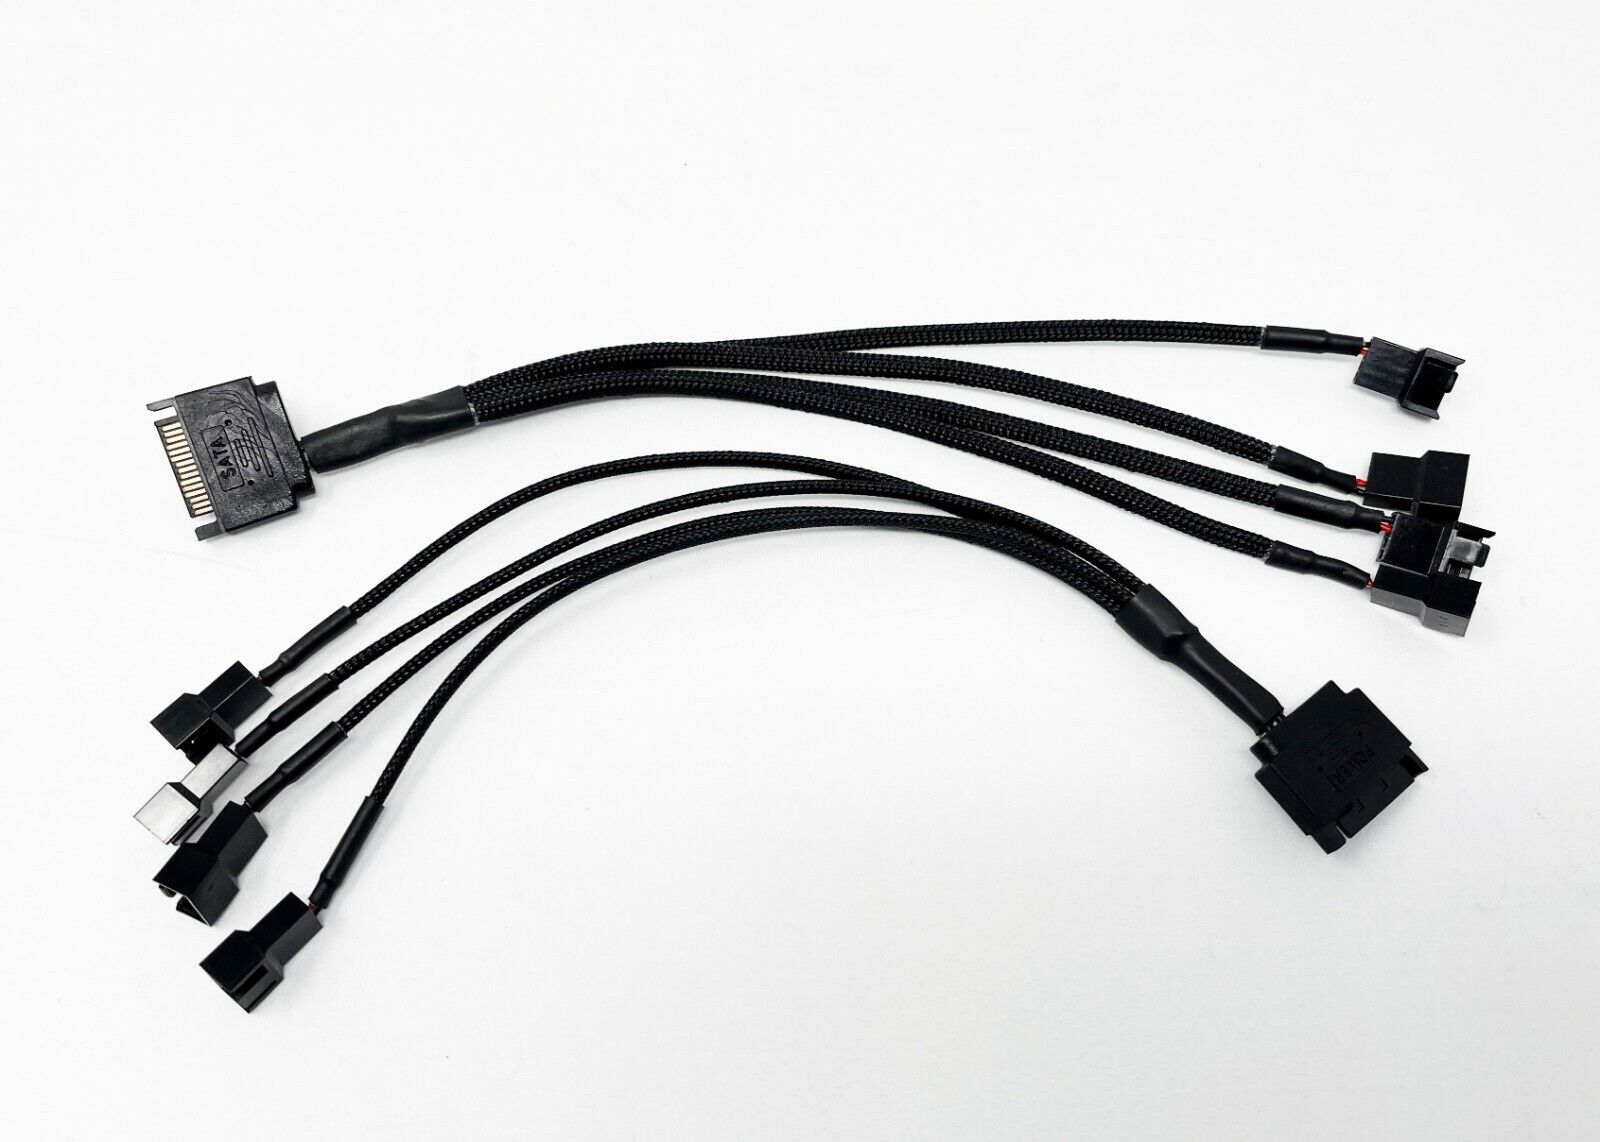 2x 15-Pin Male SATA to 4 Fan 12V Sleeved Power Adapter Cable 3 pin / 4 pin SPHINX 4048 - фотография #2